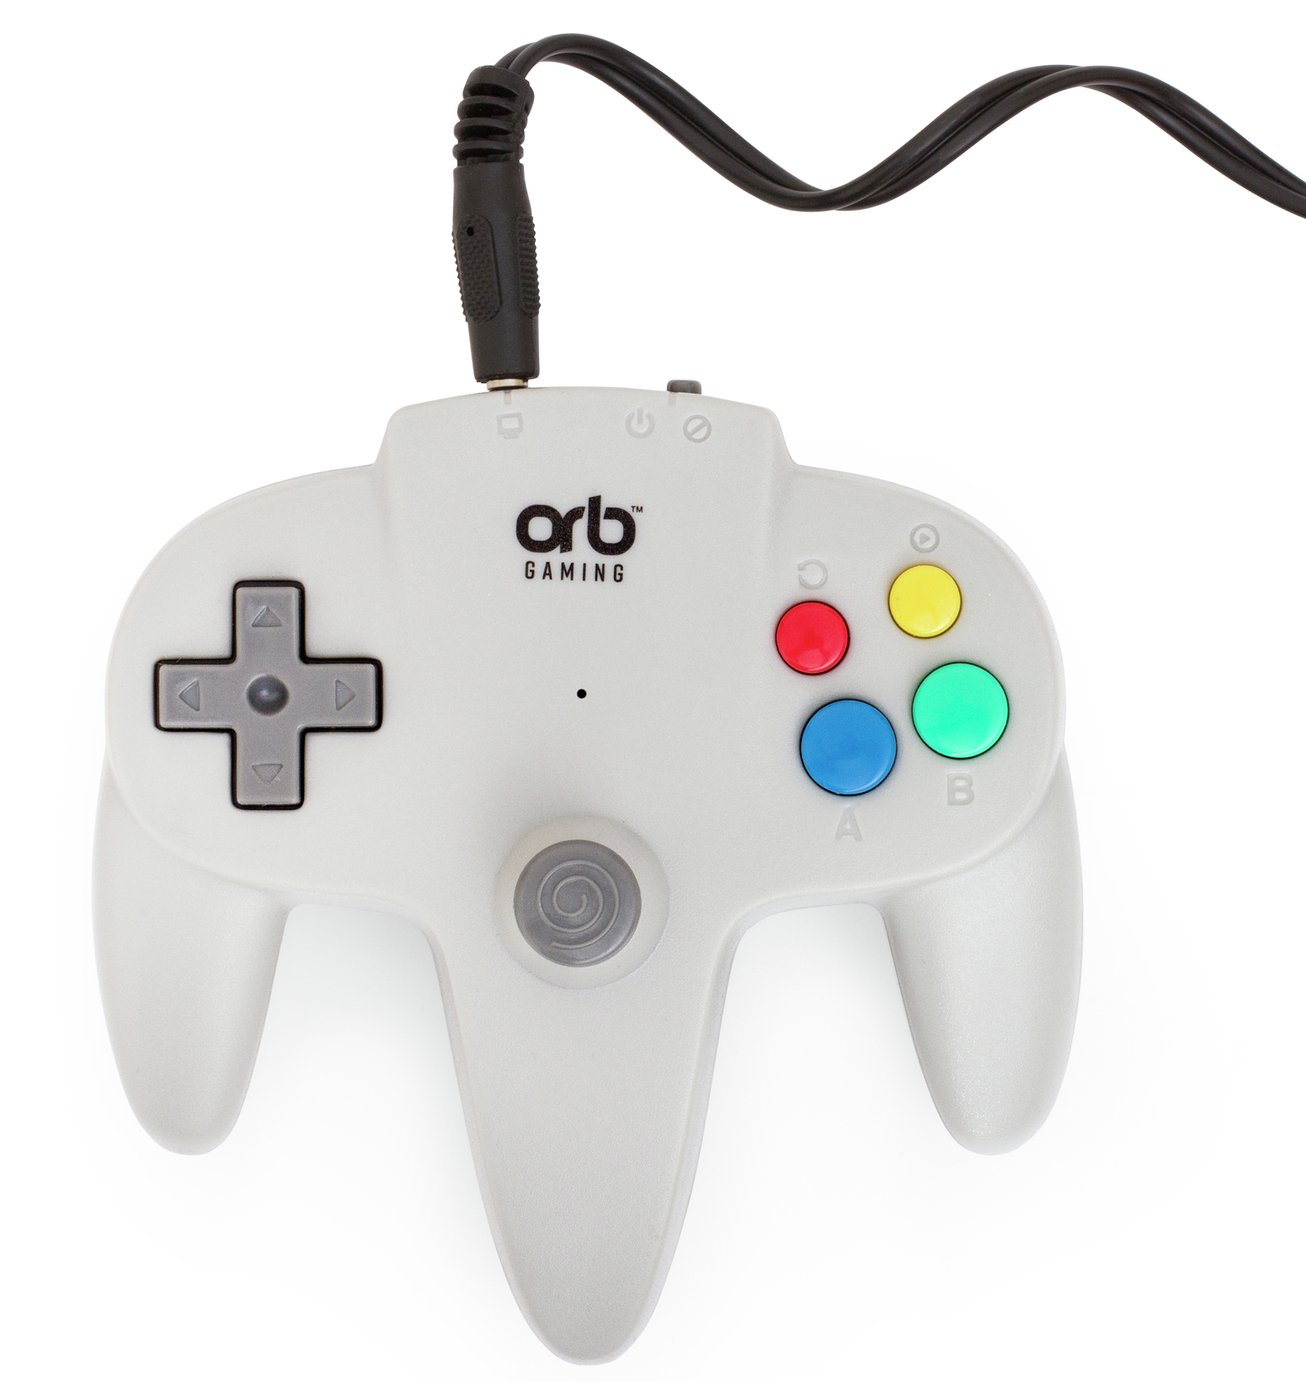 Retro Arcade Style Plug & Play Controller with 200 Games Review